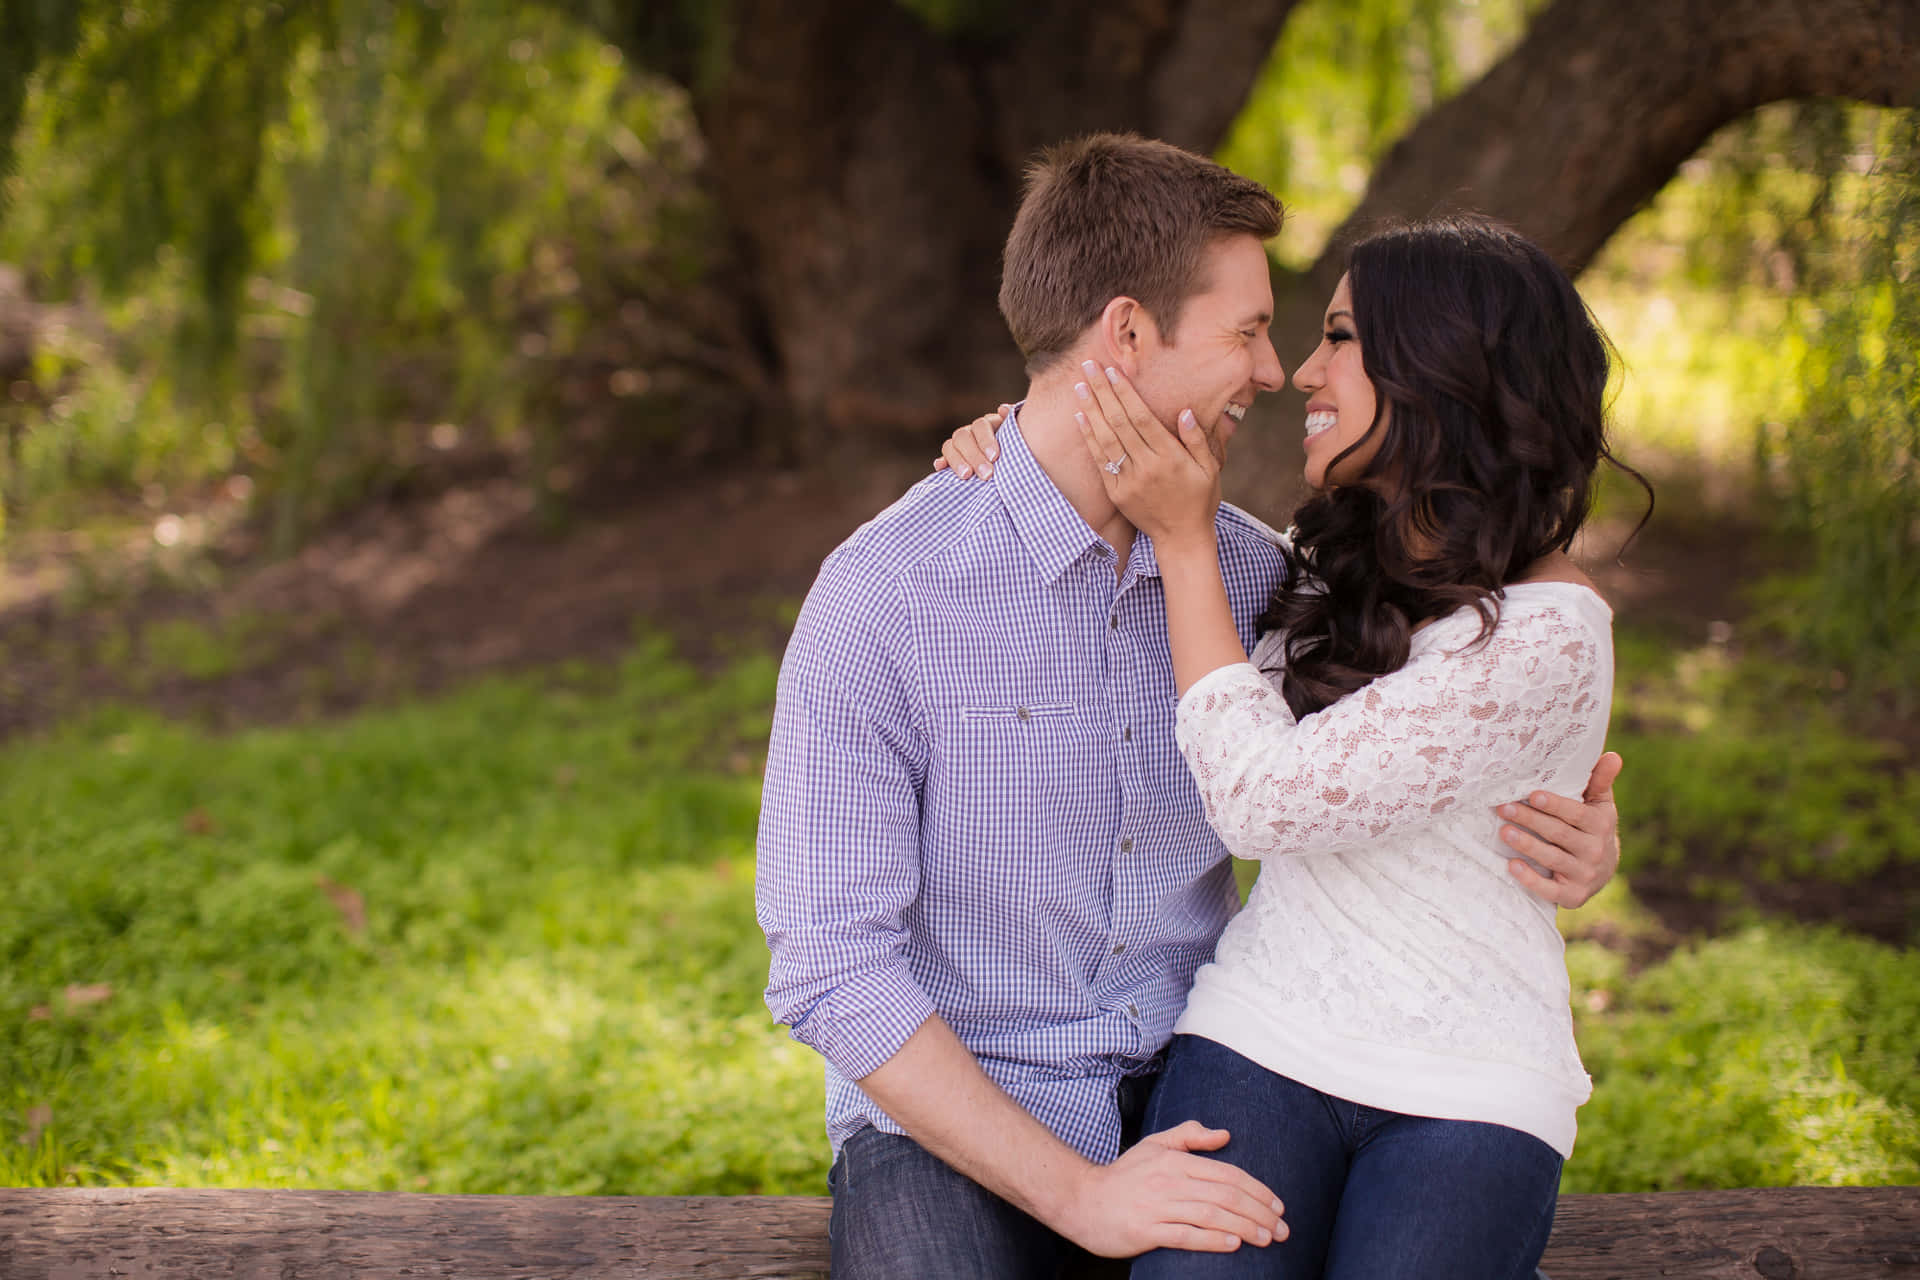 Romantic Couple Sitting Under A Tree Together | Couples, Romantic couples,  Poses